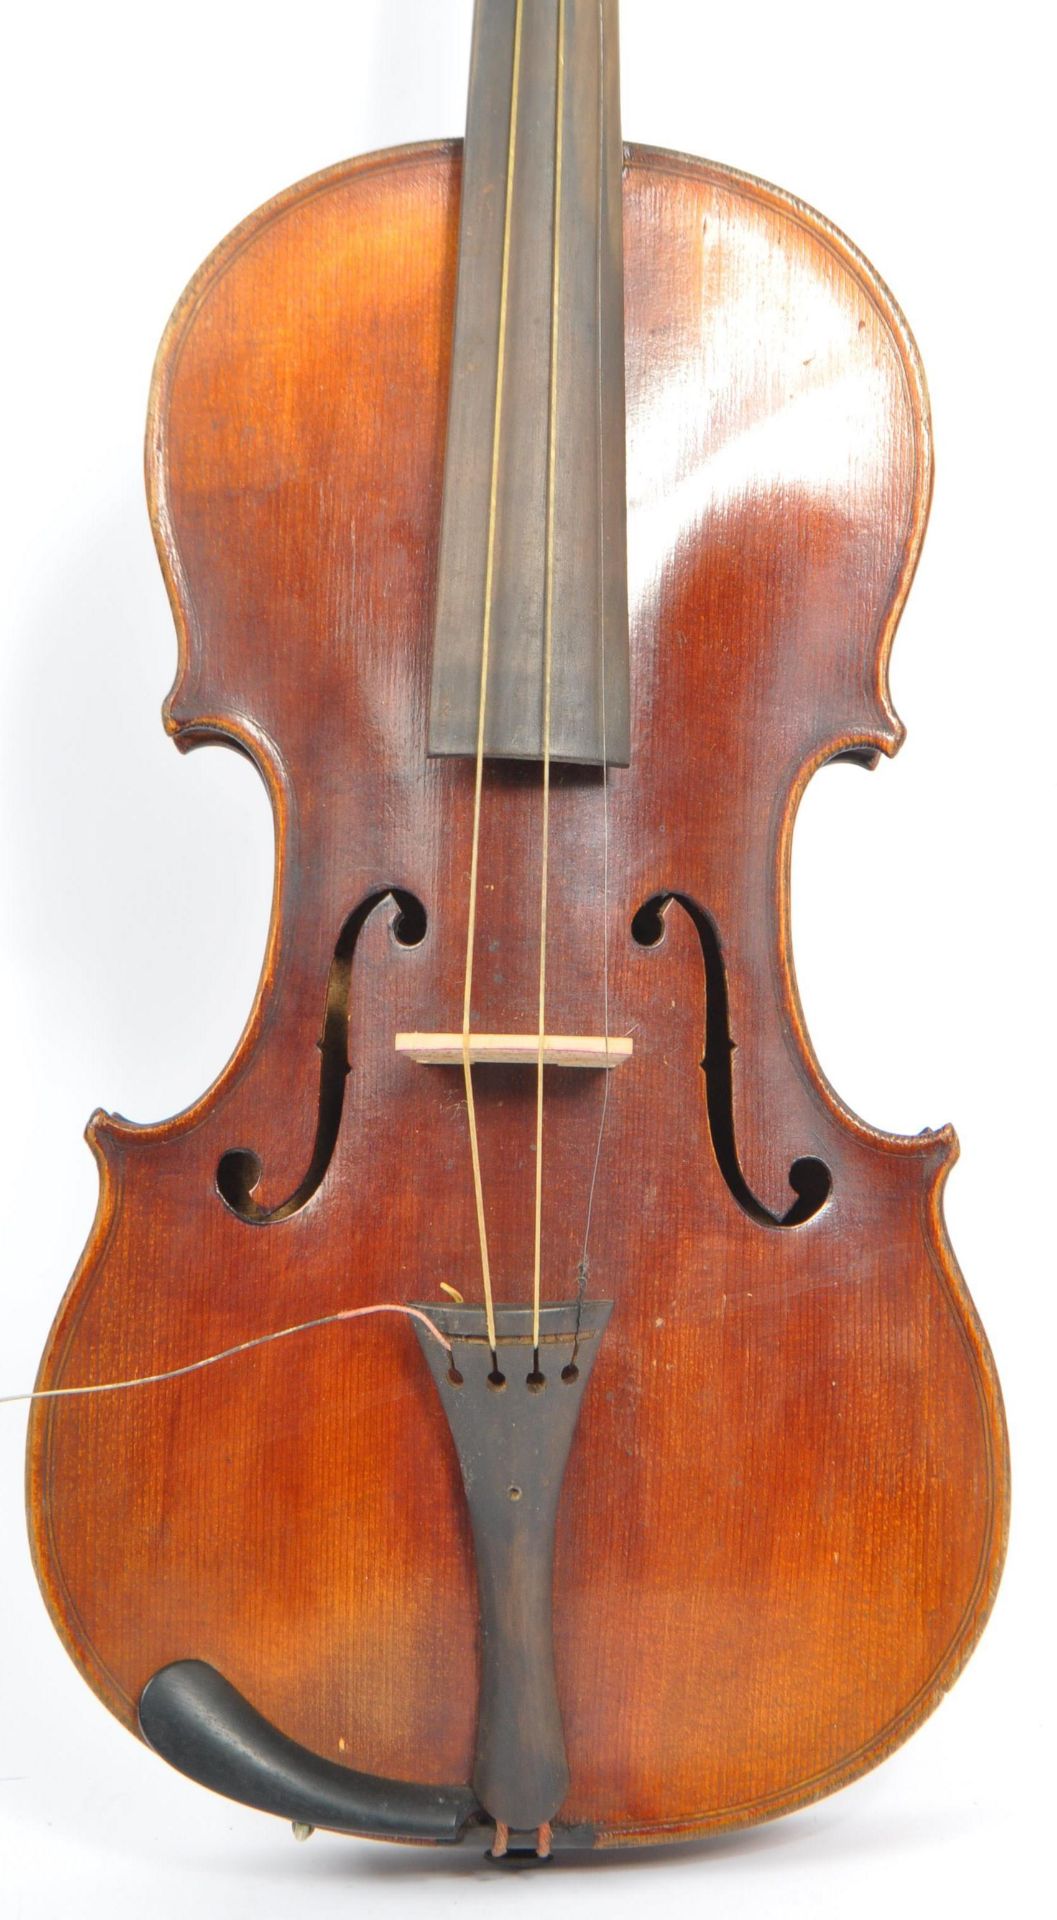 20TH CENTURY FULL SIZE VIOLIN WITH TWO PIECE BACK - Image 3 of 10